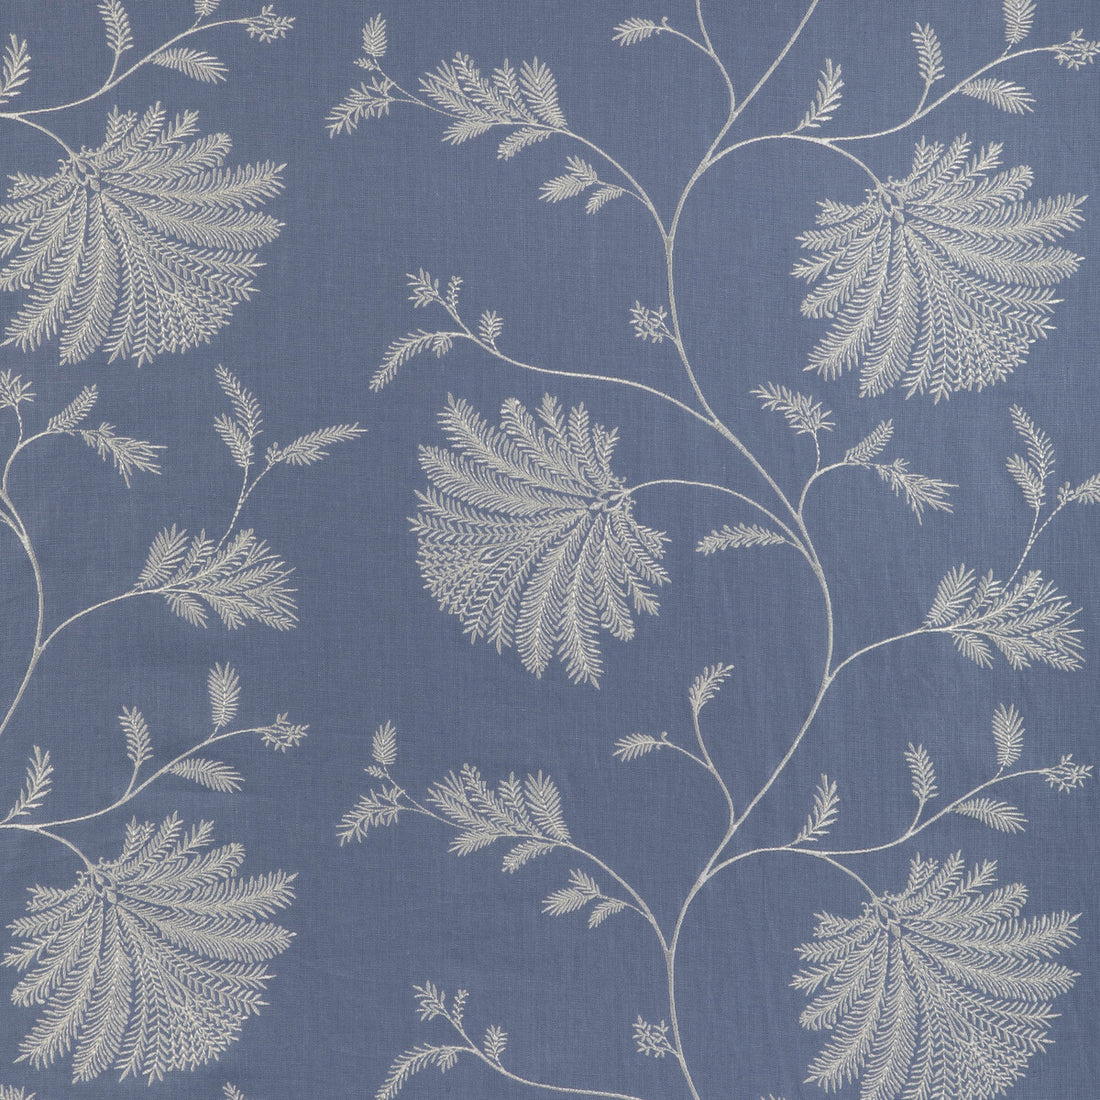 Maelle Emb fabric in blue color - pattern 8023116.5.0 - by Brunschwig &amp; Fils in the Anduze Embroideries collection